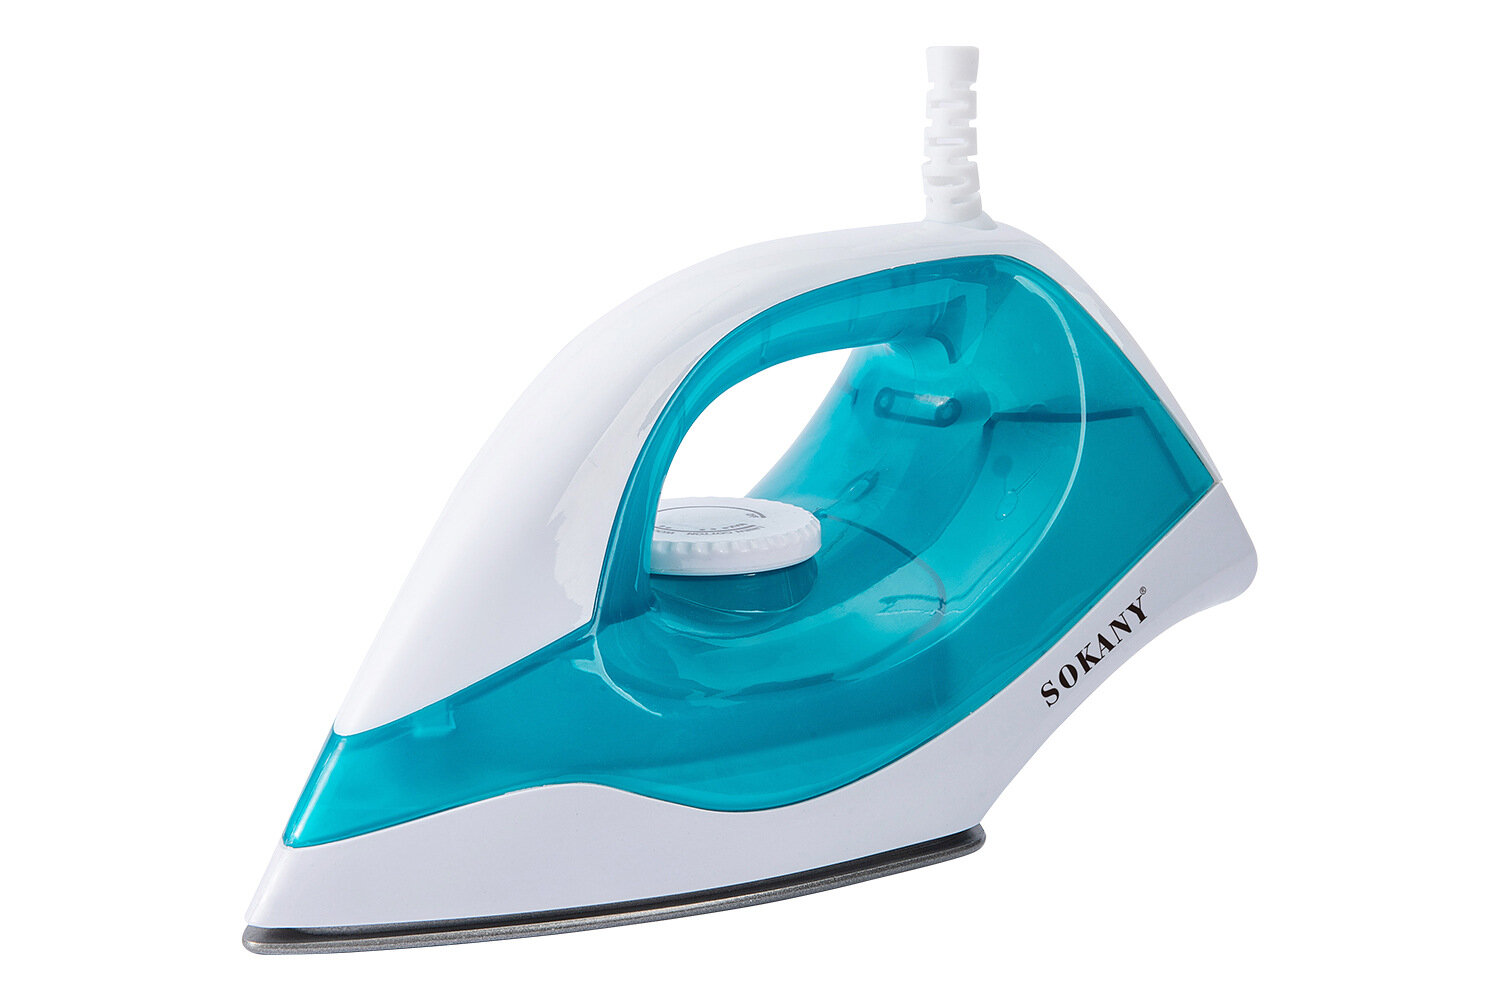 SOKANY2104 Dry Iron Household Multi-functional Steam Spray Electric Iron with Random Color